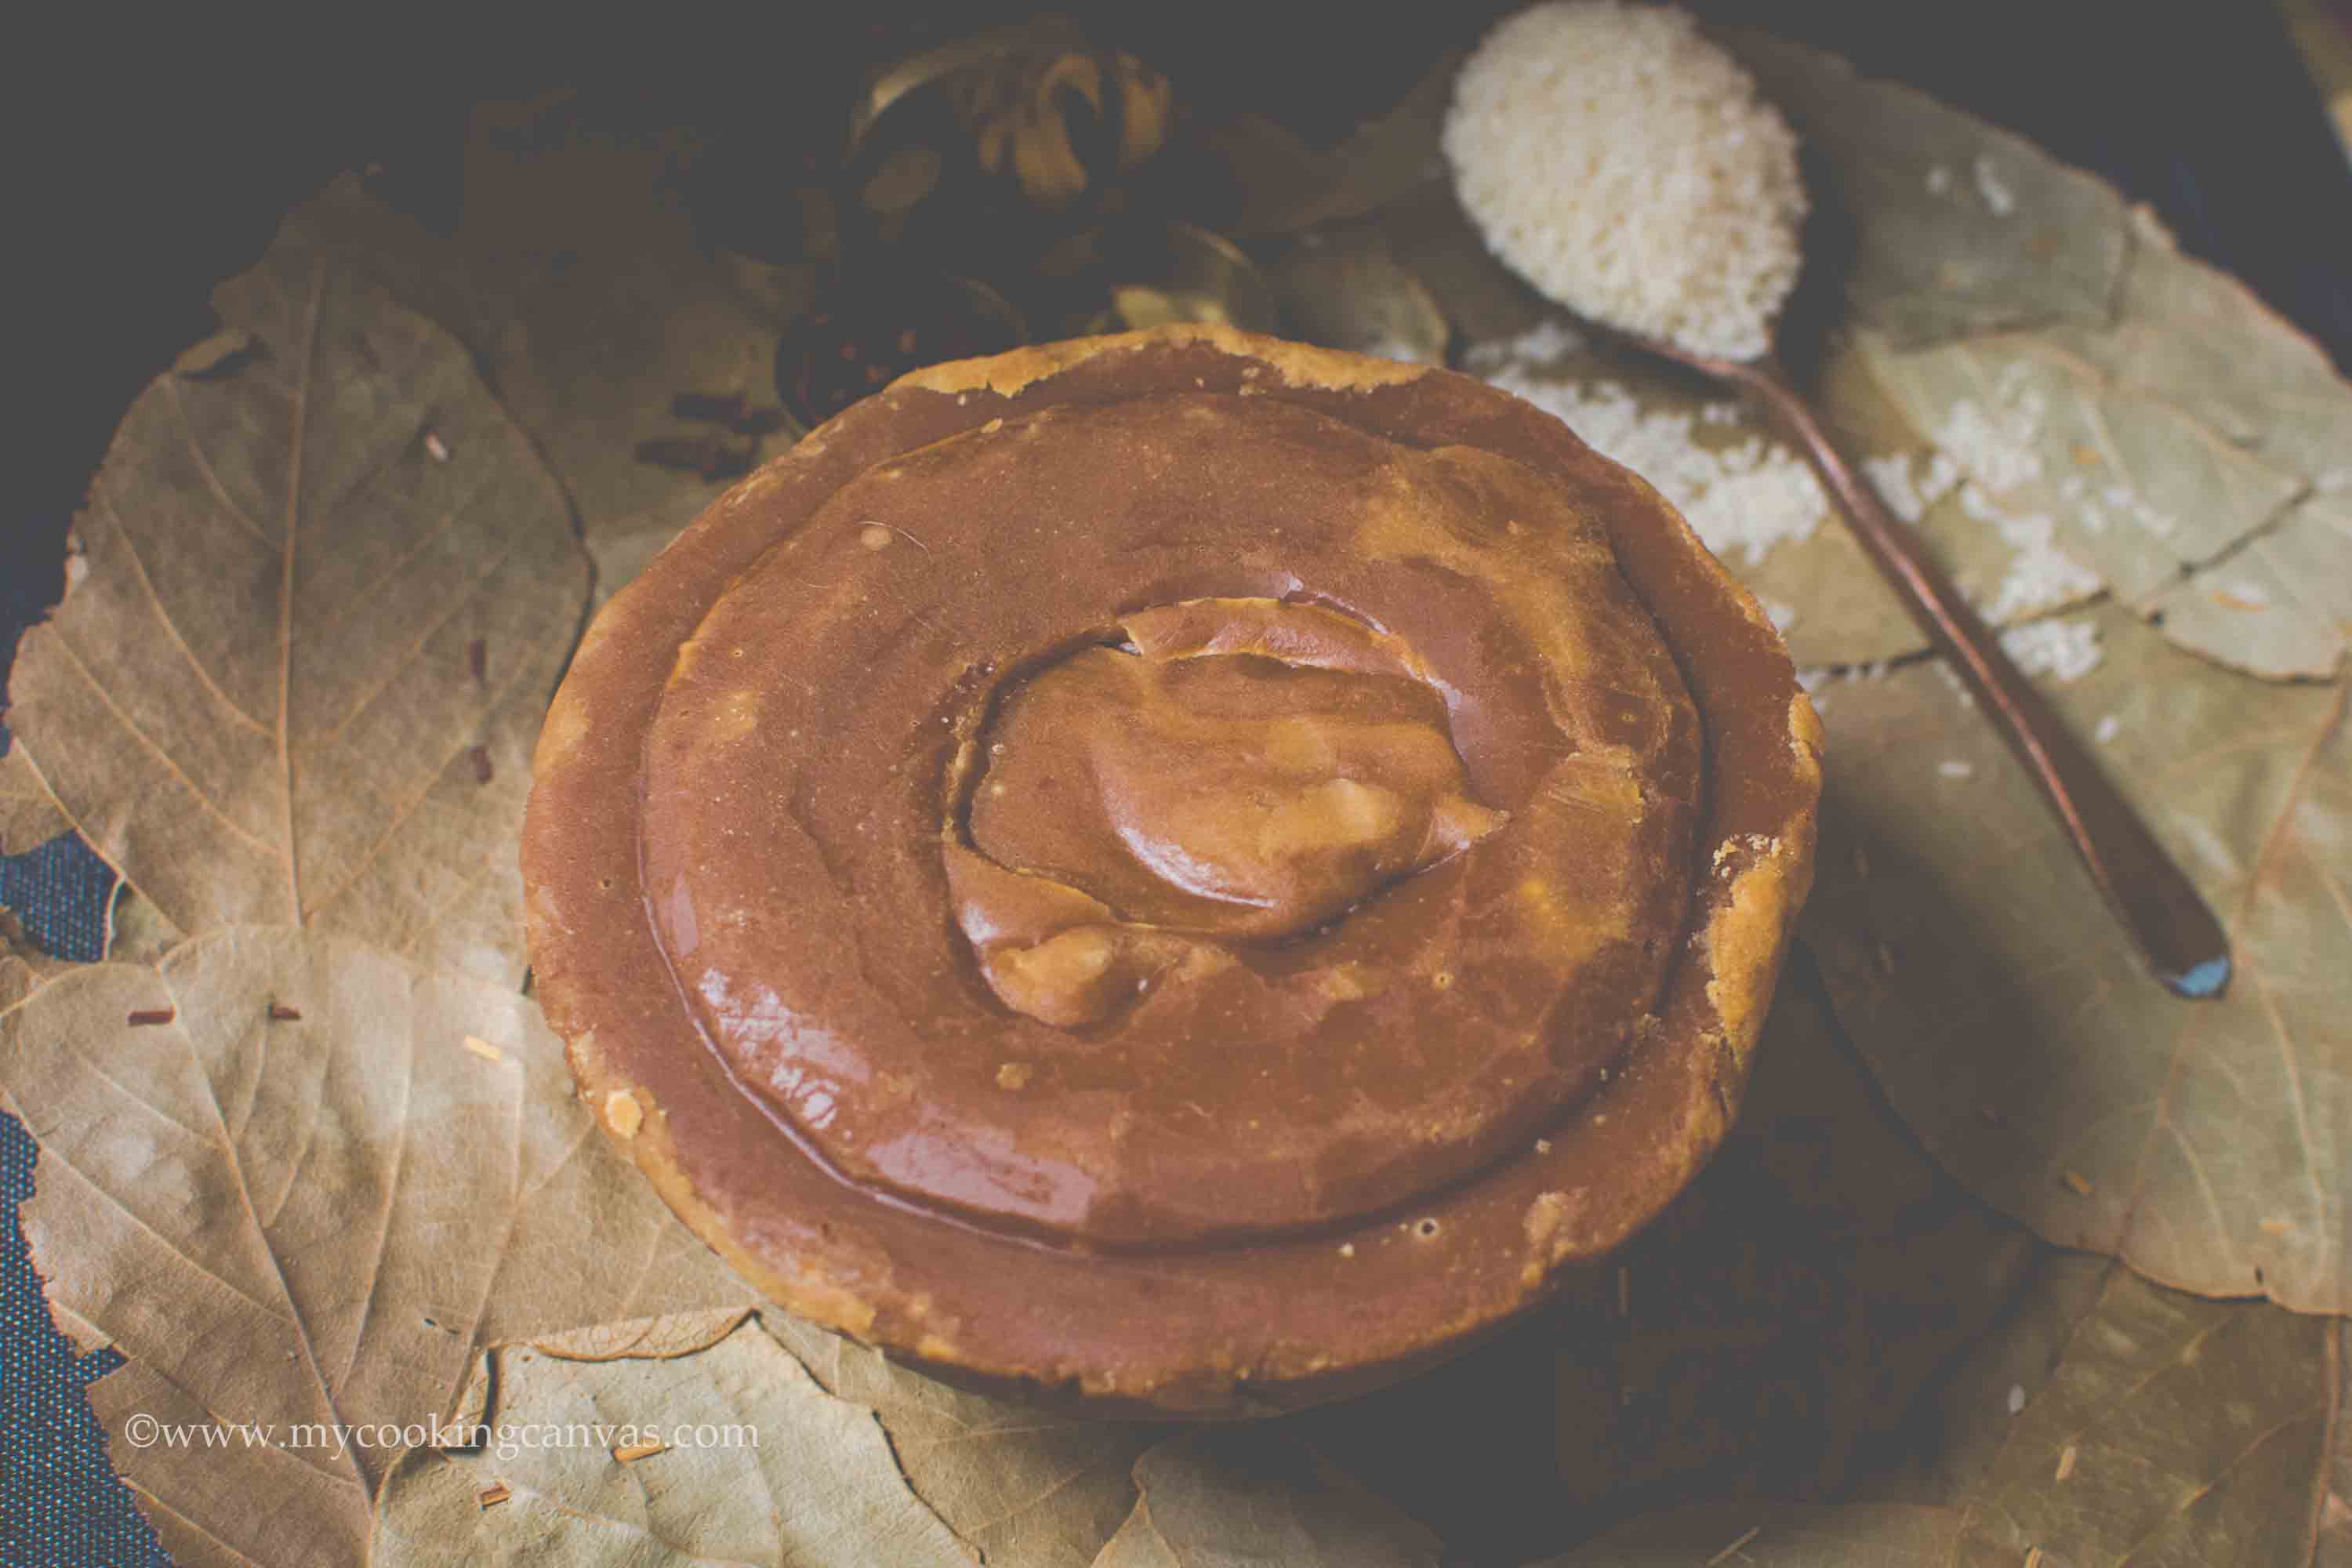 Bliss Patisserie - Nolen Gur, the indigenous date palm jaggery is a popular  winter delicacy, especially in the Bengali households in east India. Bliss  Patisserie's Nolen Gur Cake is a super moist